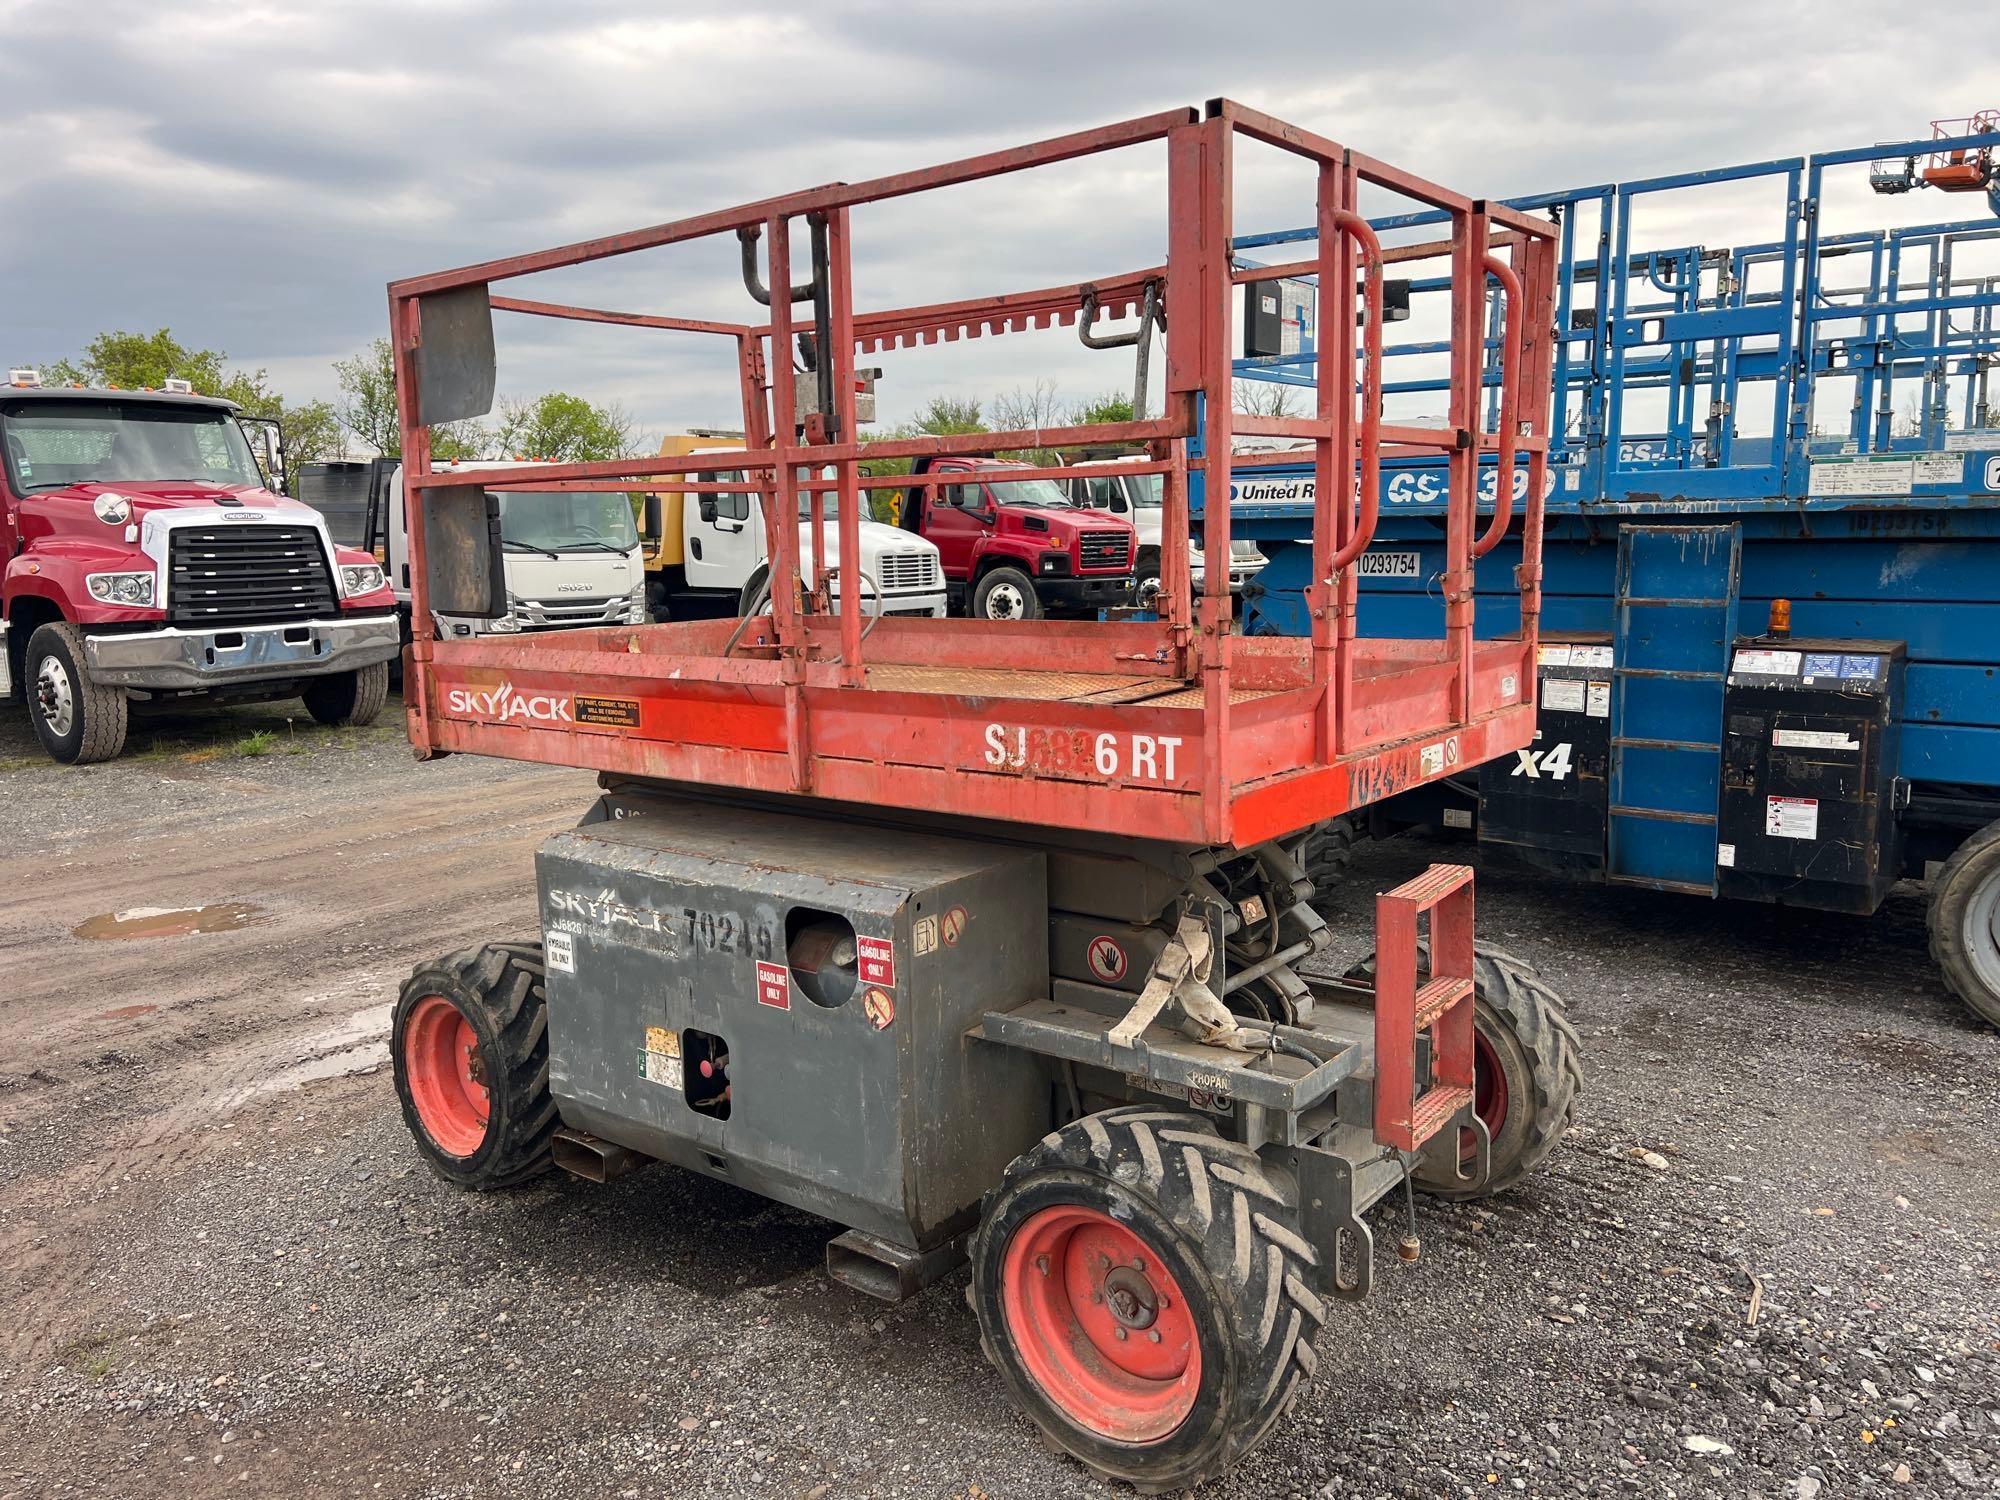 SKYJACK SJ6826RT SCISSOR LIFT SN-003883... ...4x4, powered by dual fuel engine, equipped with 26ft.